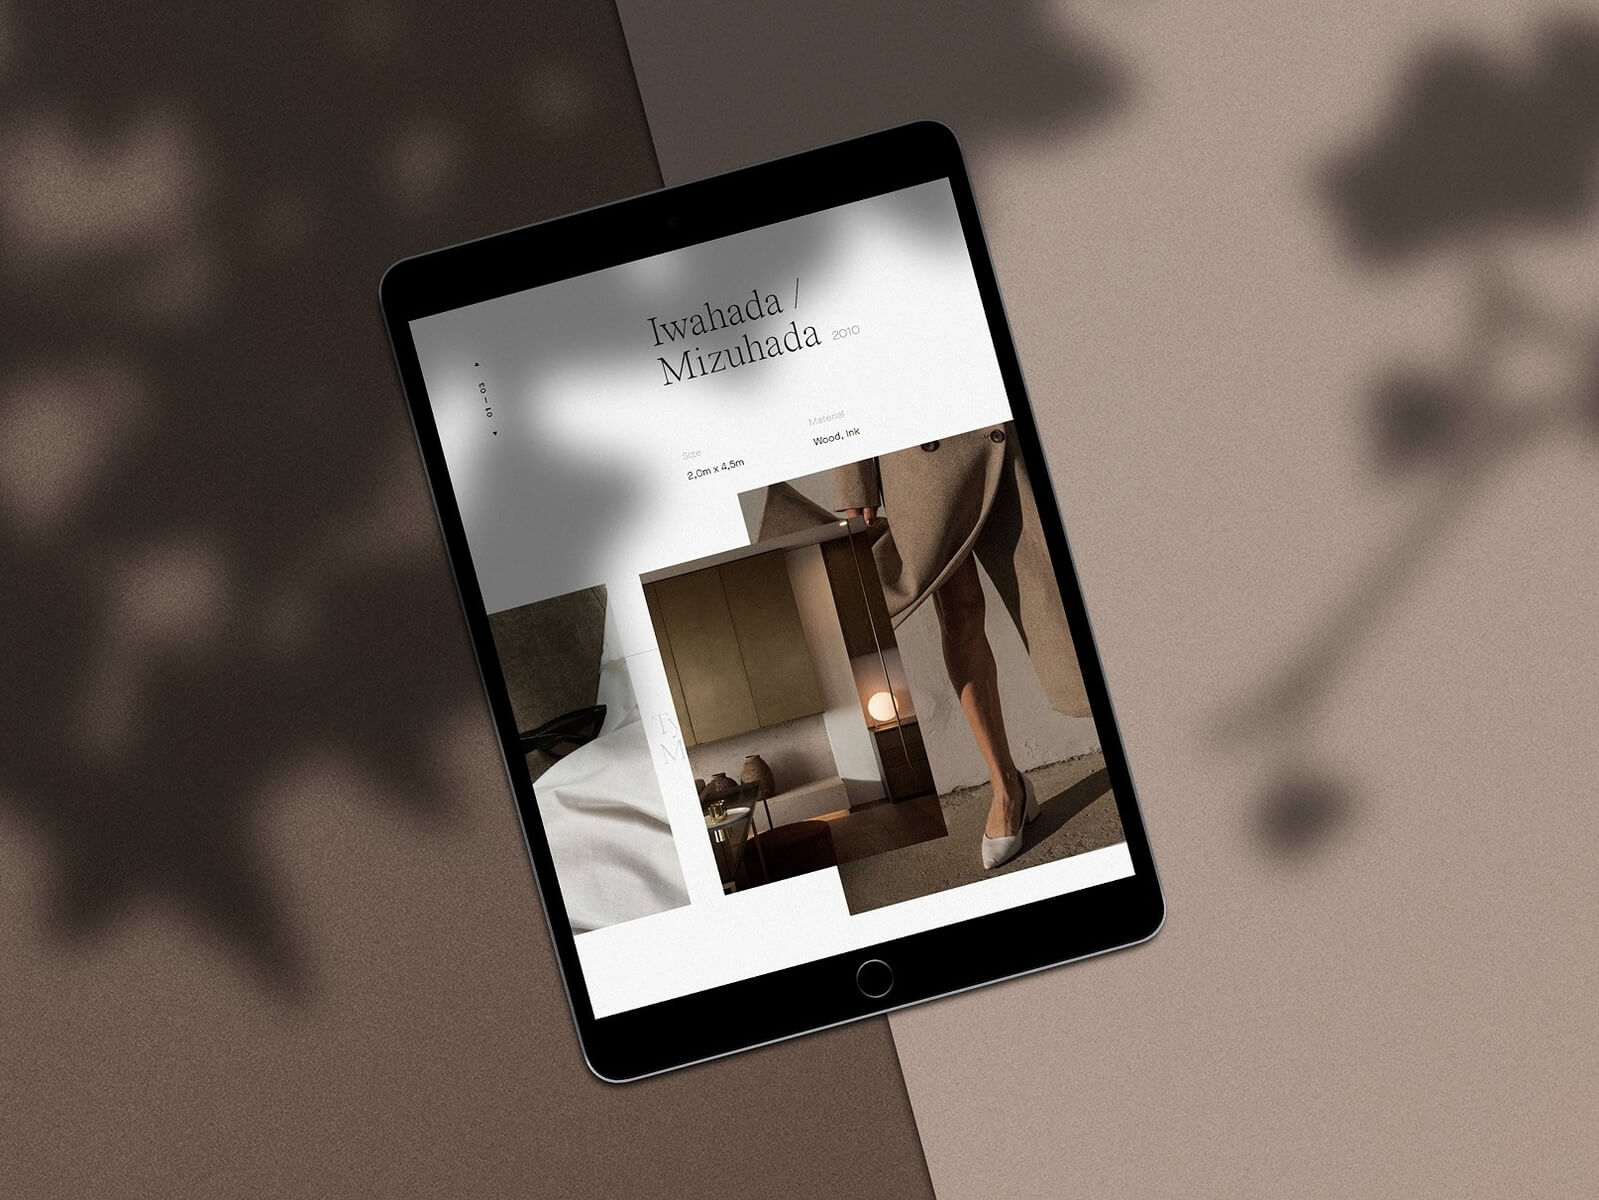 Download 20 Best Free Ipad Mockups And Templates Psd Sketch In 2019 PSD Mockup Templates